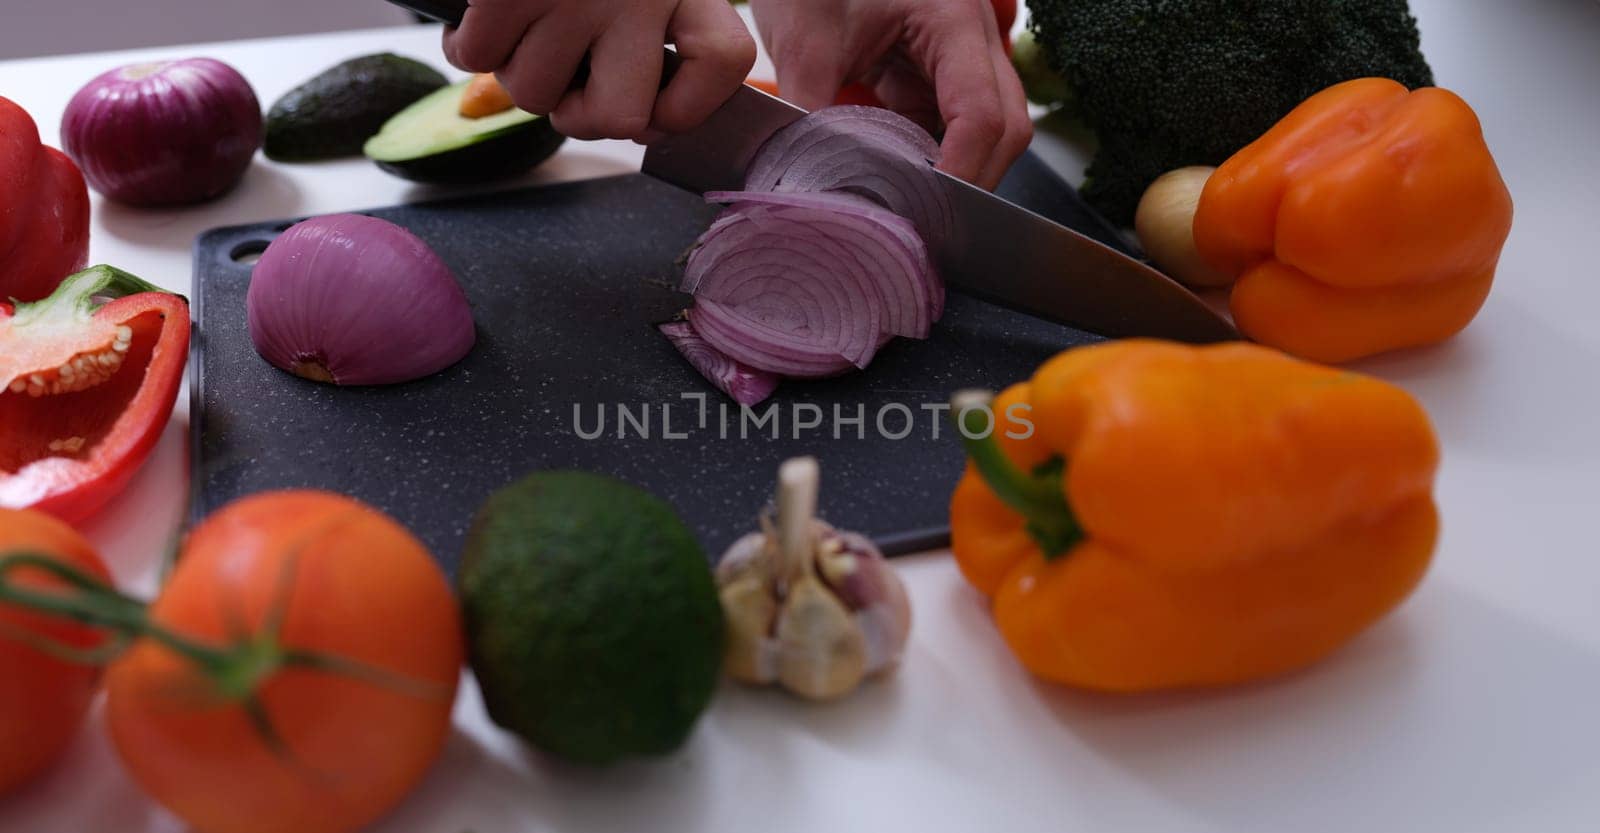 Chef cutting red onion on board among vegetables closeup. Recipes for cooking dishes from farm products concept